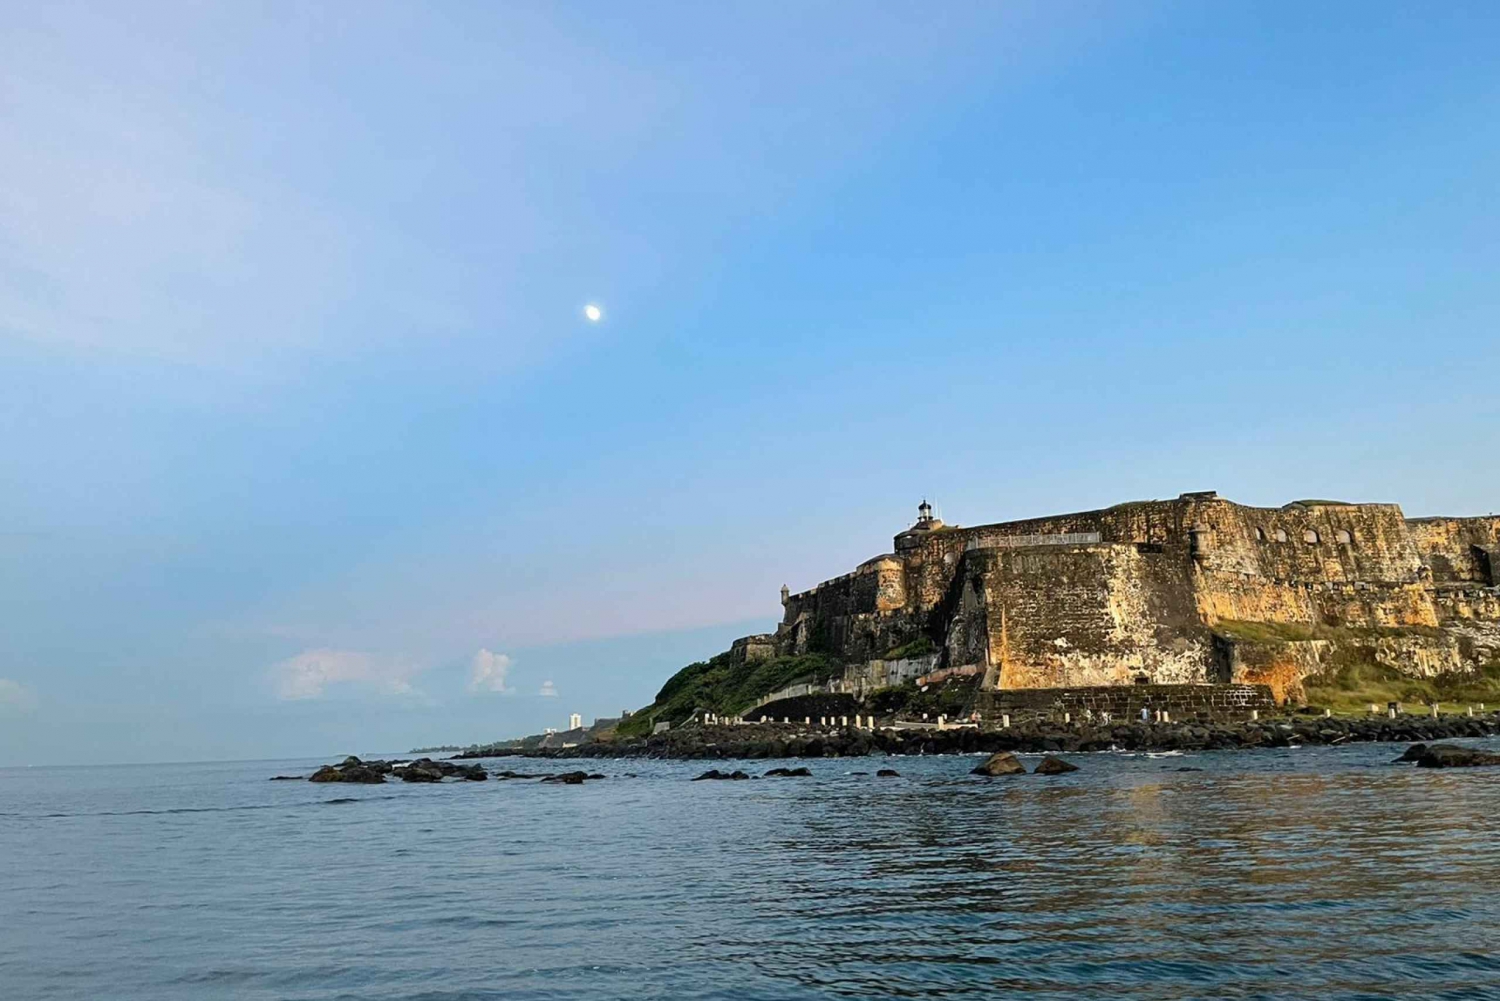 San Juan 500 Fest: Guided City Walking Tour and Boat Cruise